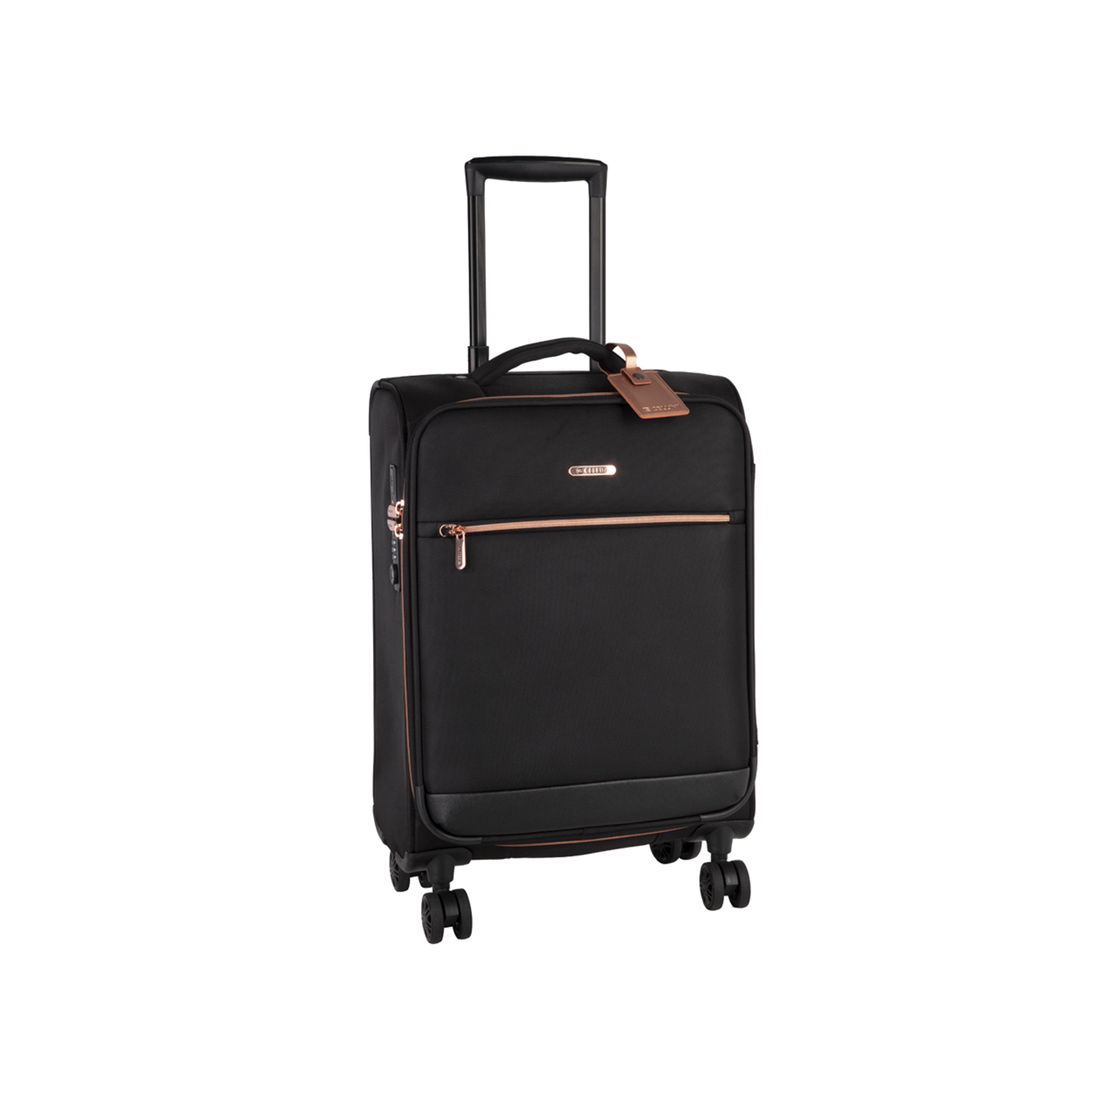 ALLURE 55CM CARRY ON